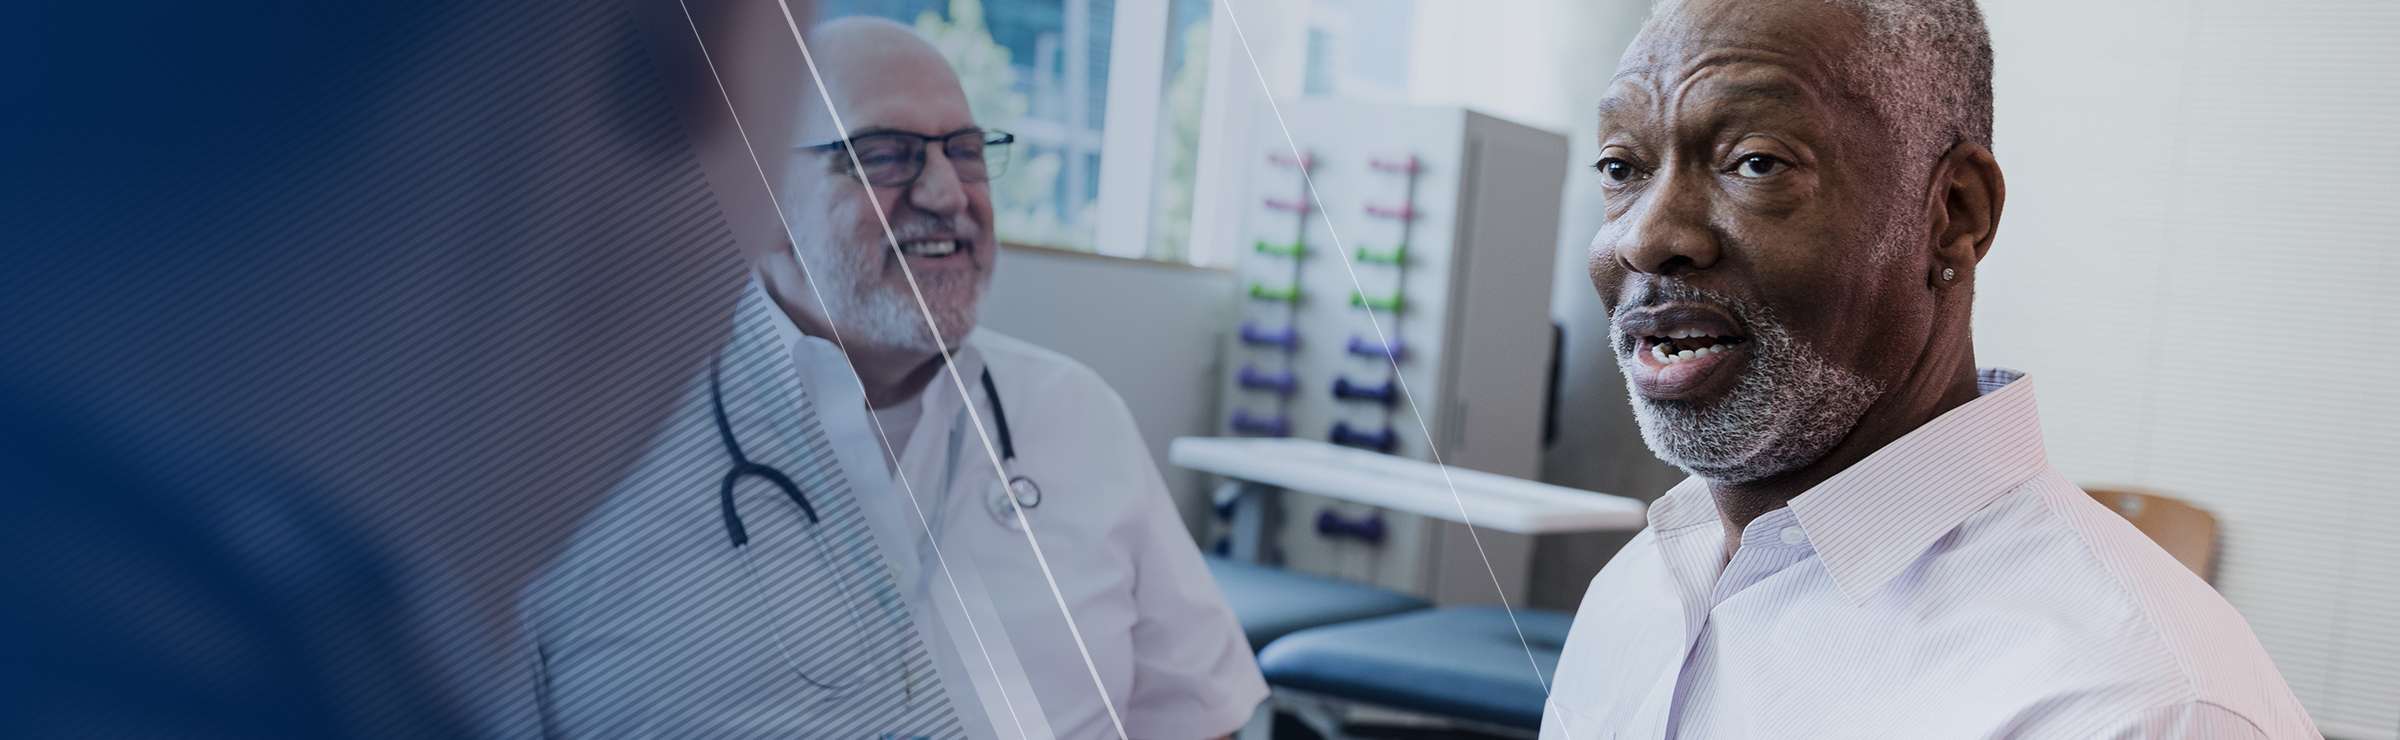 Man with beard talking to healthcare professional (HCP) wearing a stethoscope